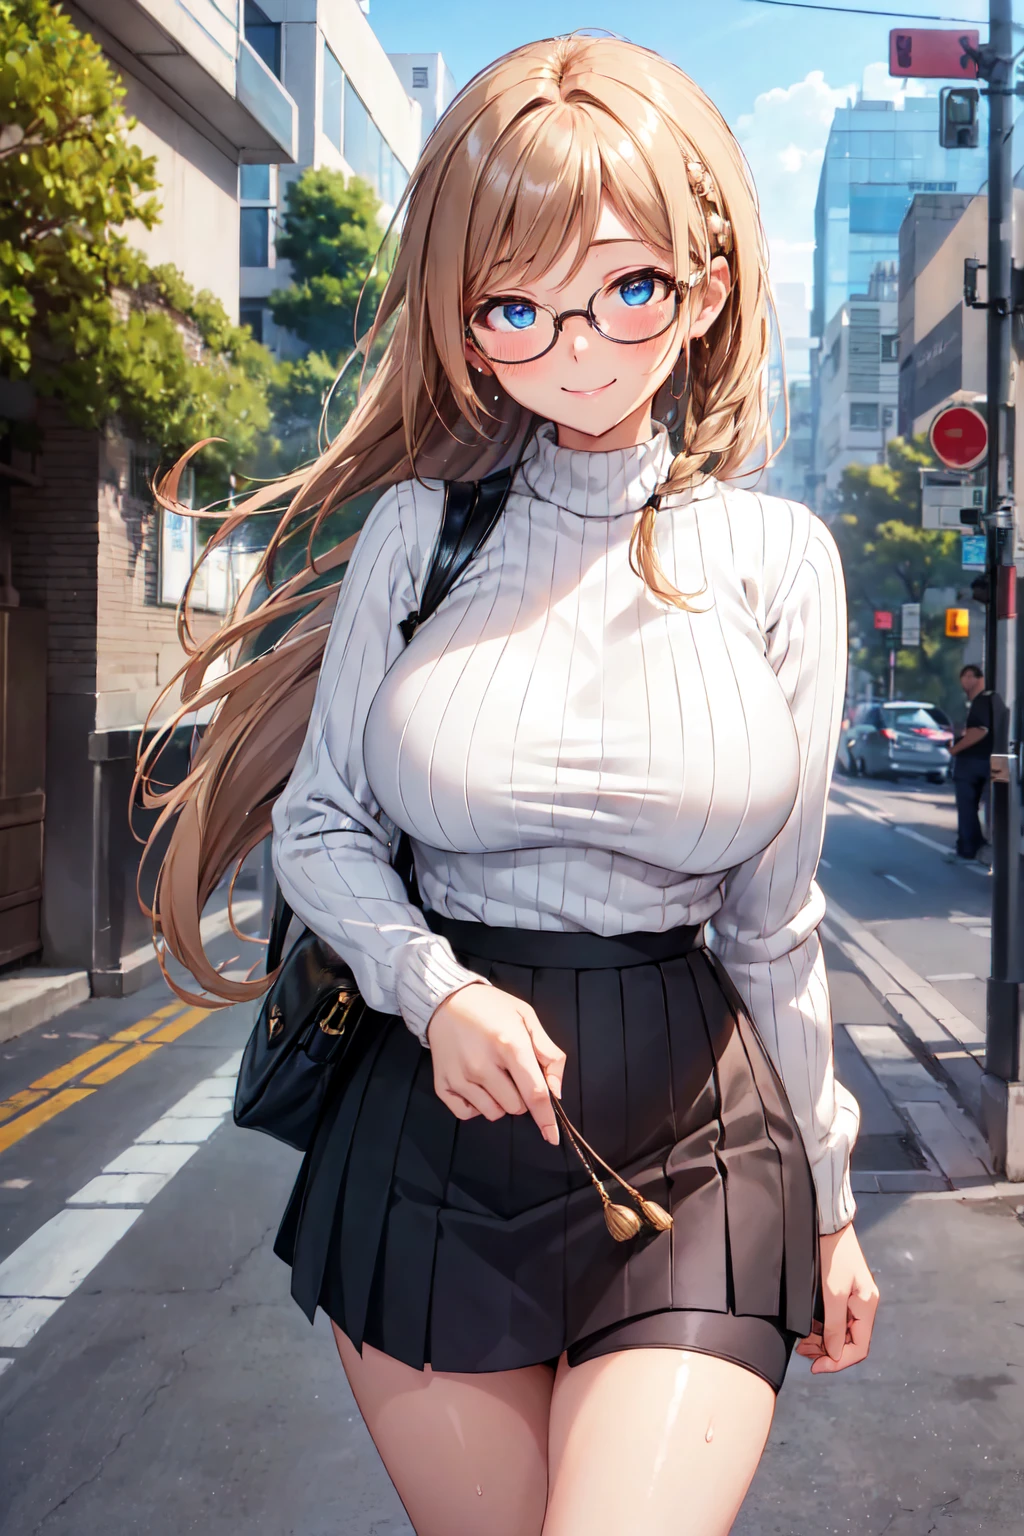 (high quality, High resolution, Finer details), Sidewalk, Side view, alone, girl, Braiding, , Sparkling eyes, (large round frame glasses), (Beautiful Eyes), Big Breasts, ((A kind smile)), blush, Sweat, Oily skin, (focal plane), Shallow depth of field，Knitted sweater，Tight Skirt